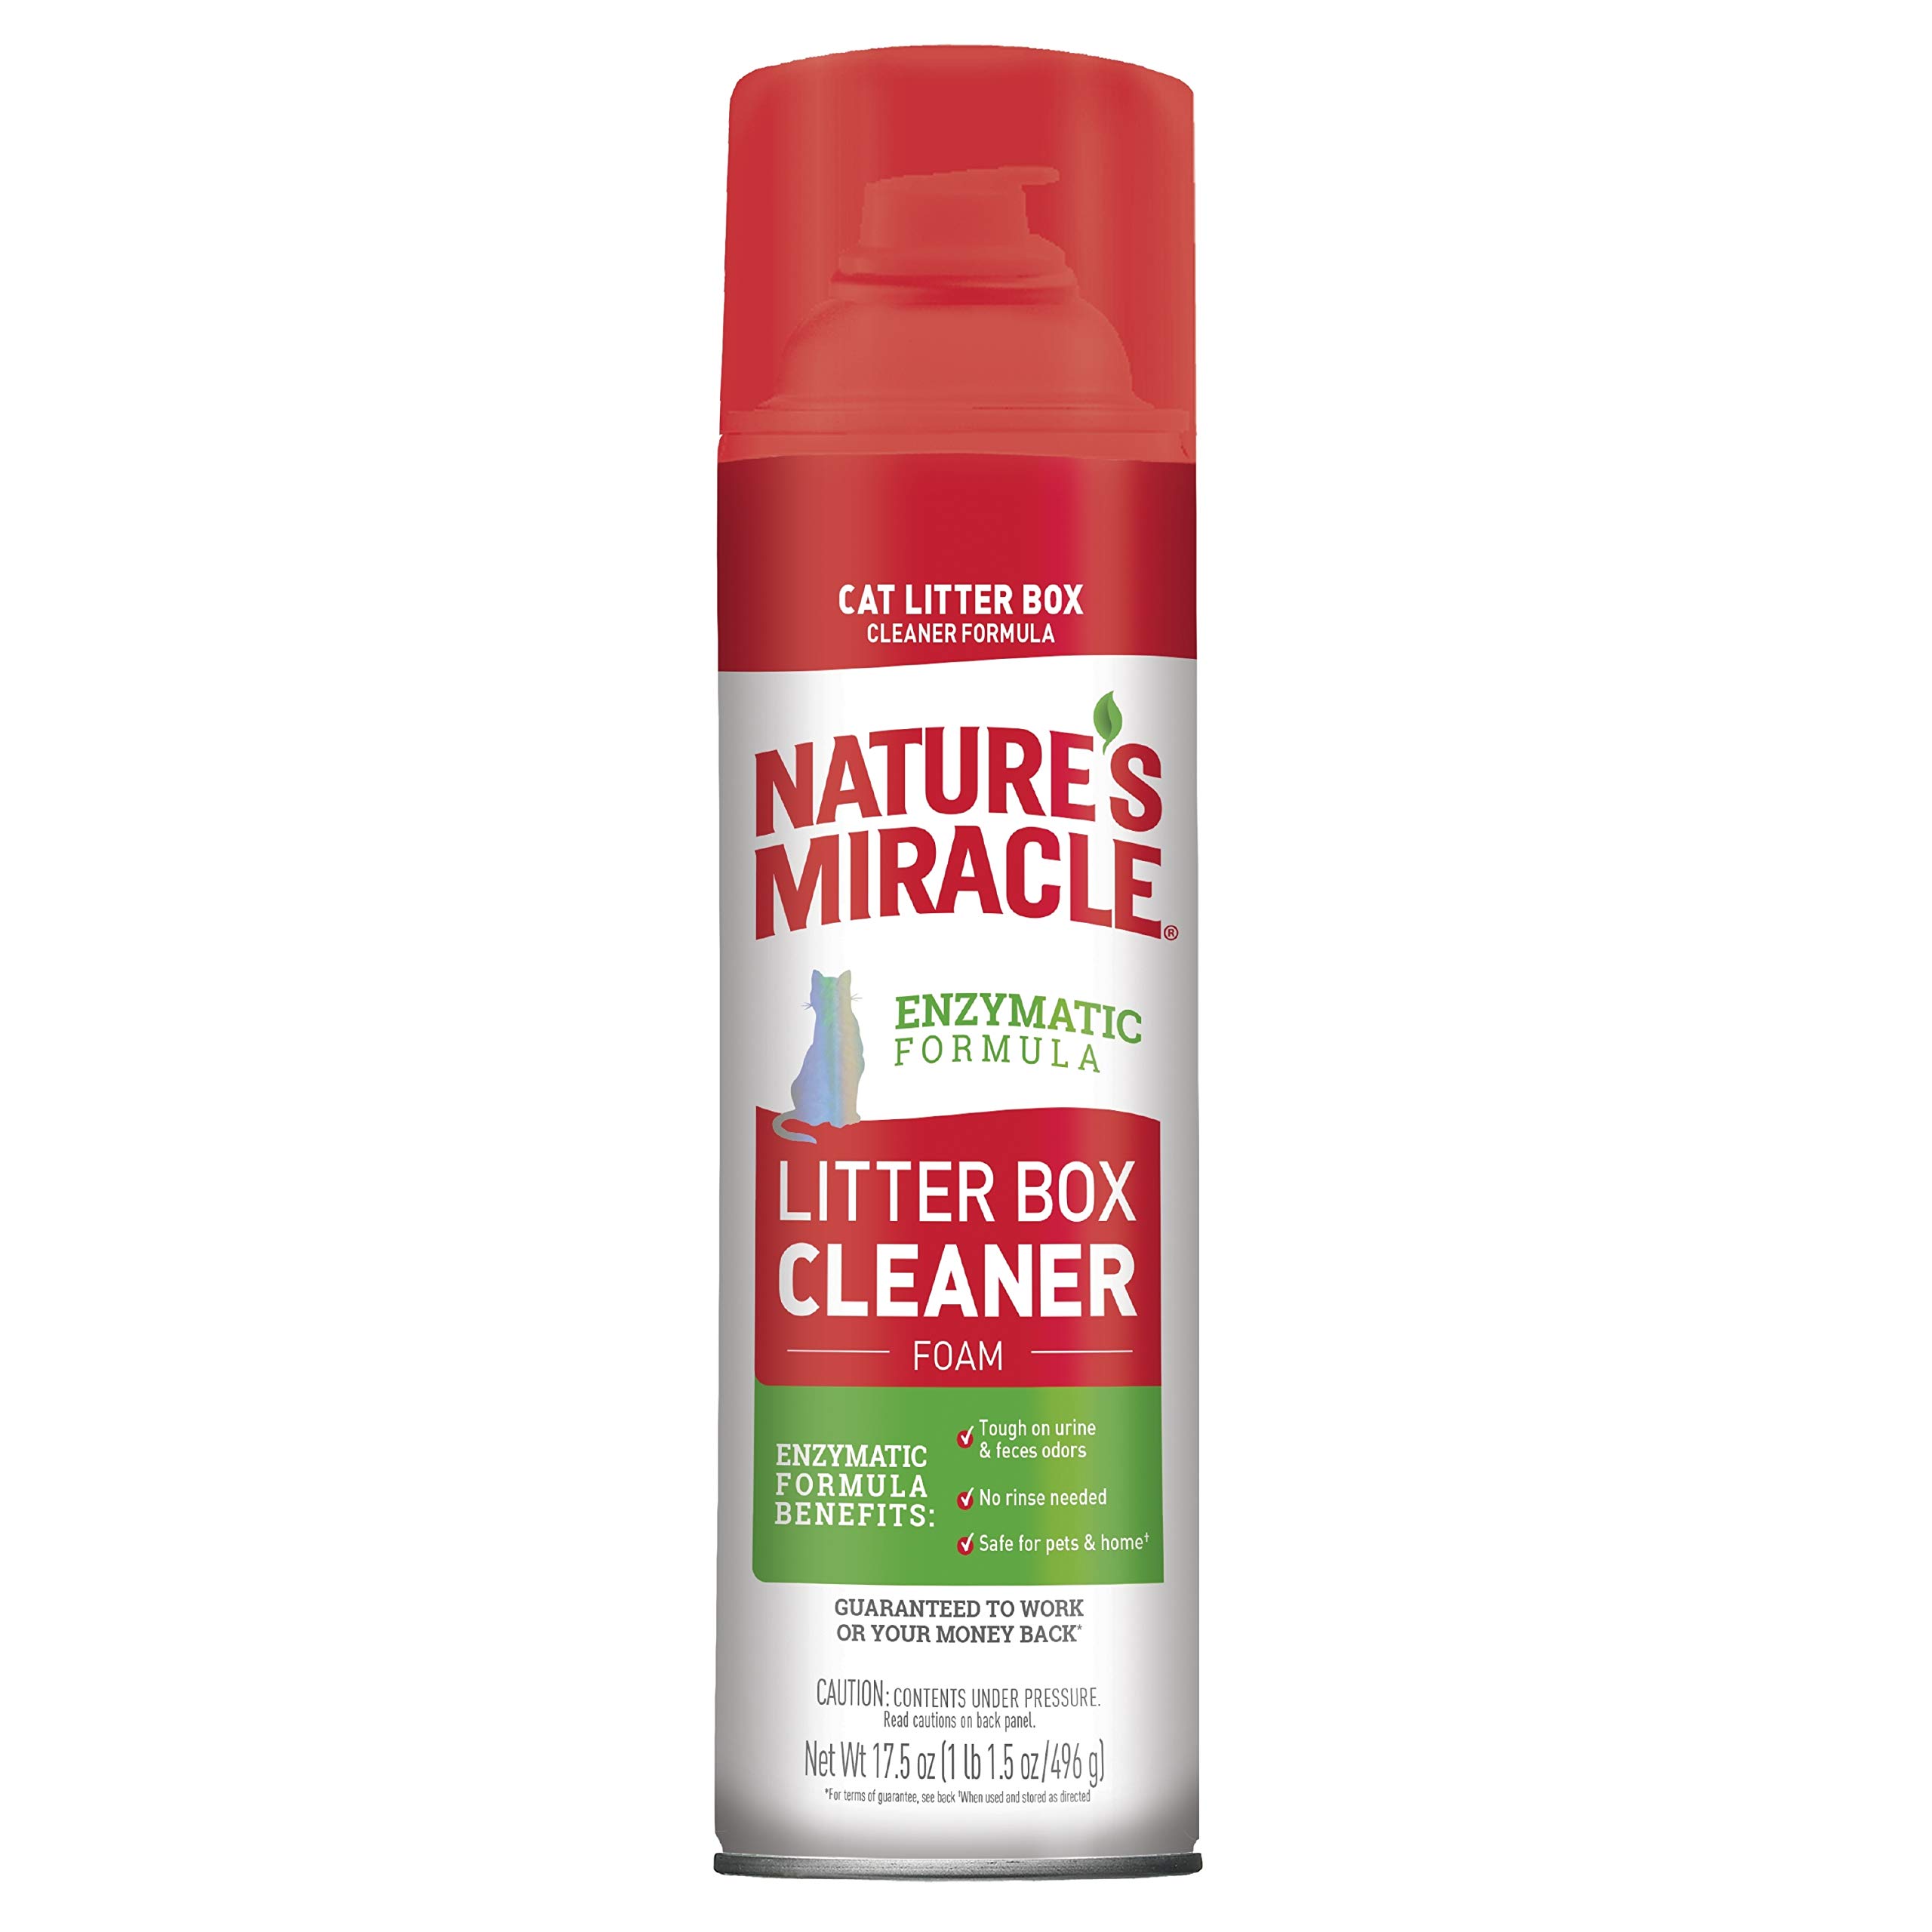 17.5-Oz Nature's Miracle Litter Box Cleaner Foam $5.35 + Free Shipping w/ Prime or on $35+